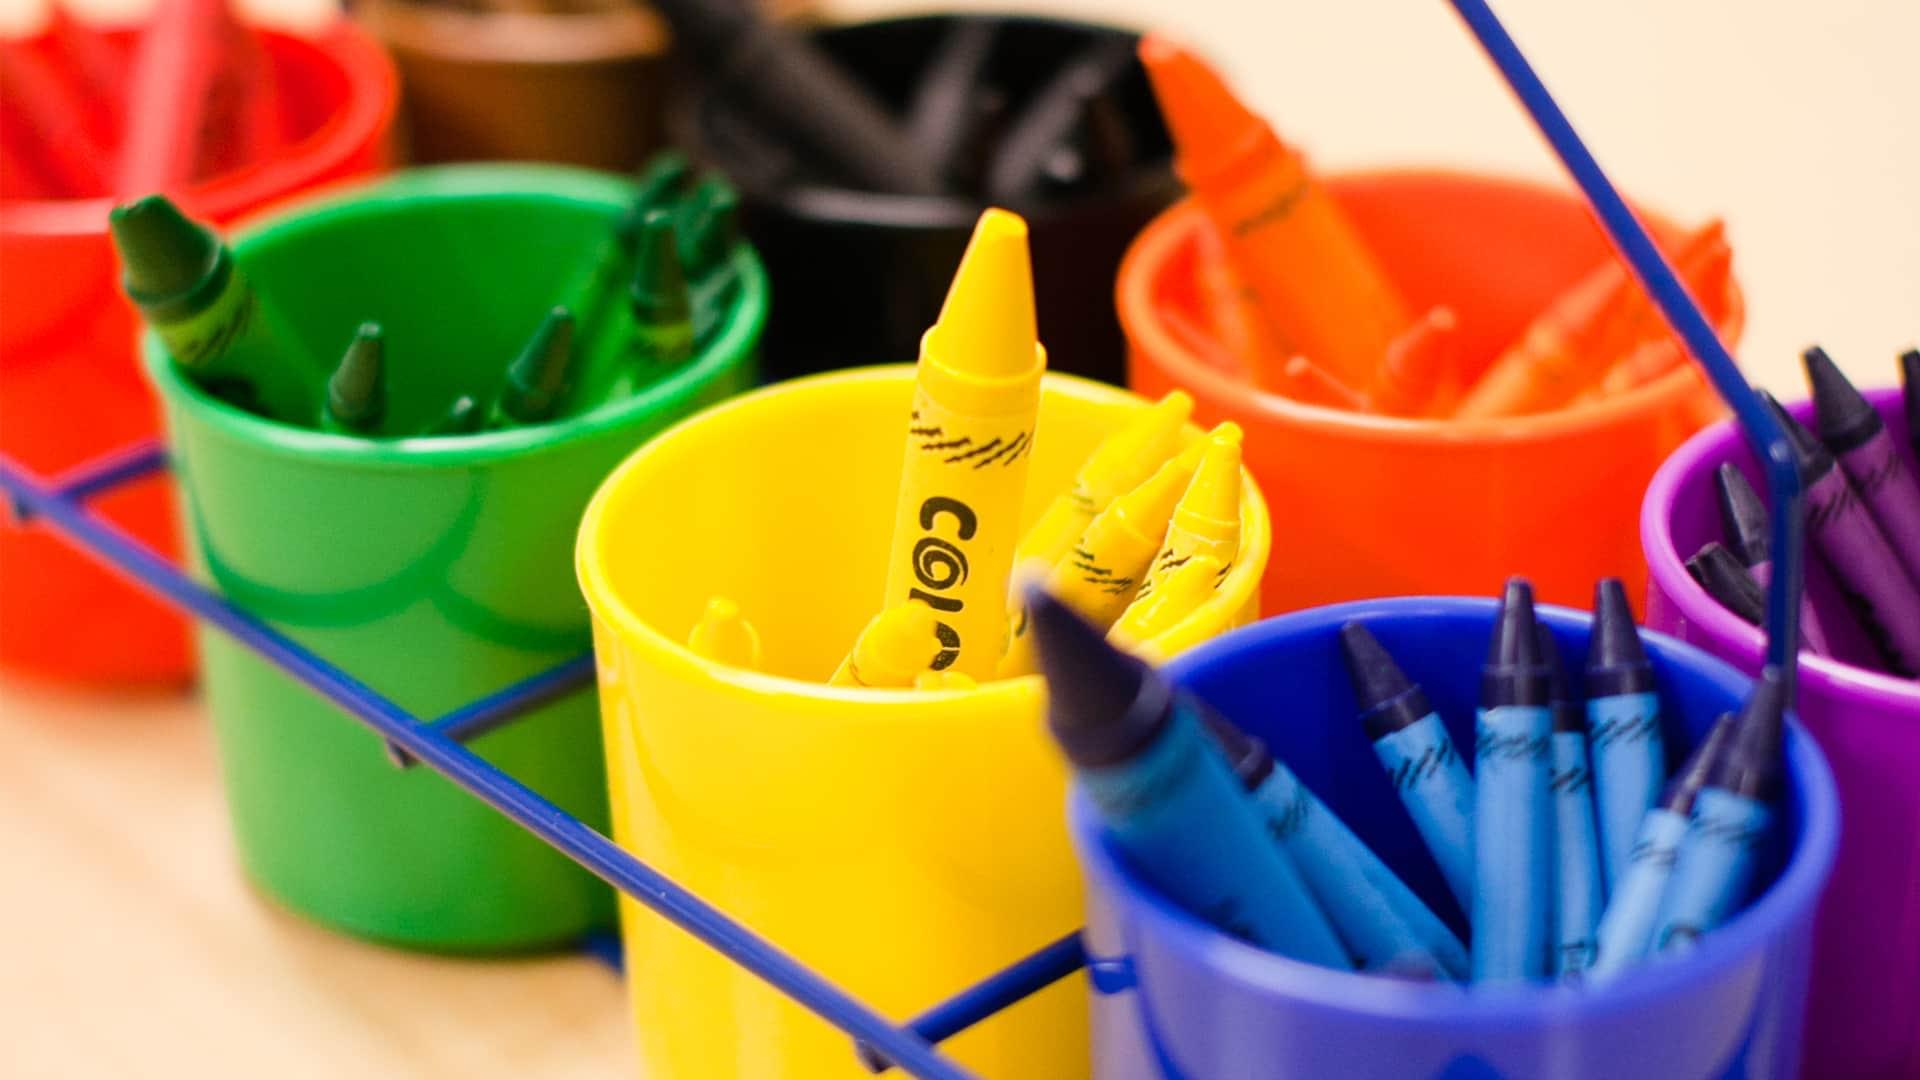 Eight cups holding colored crayons